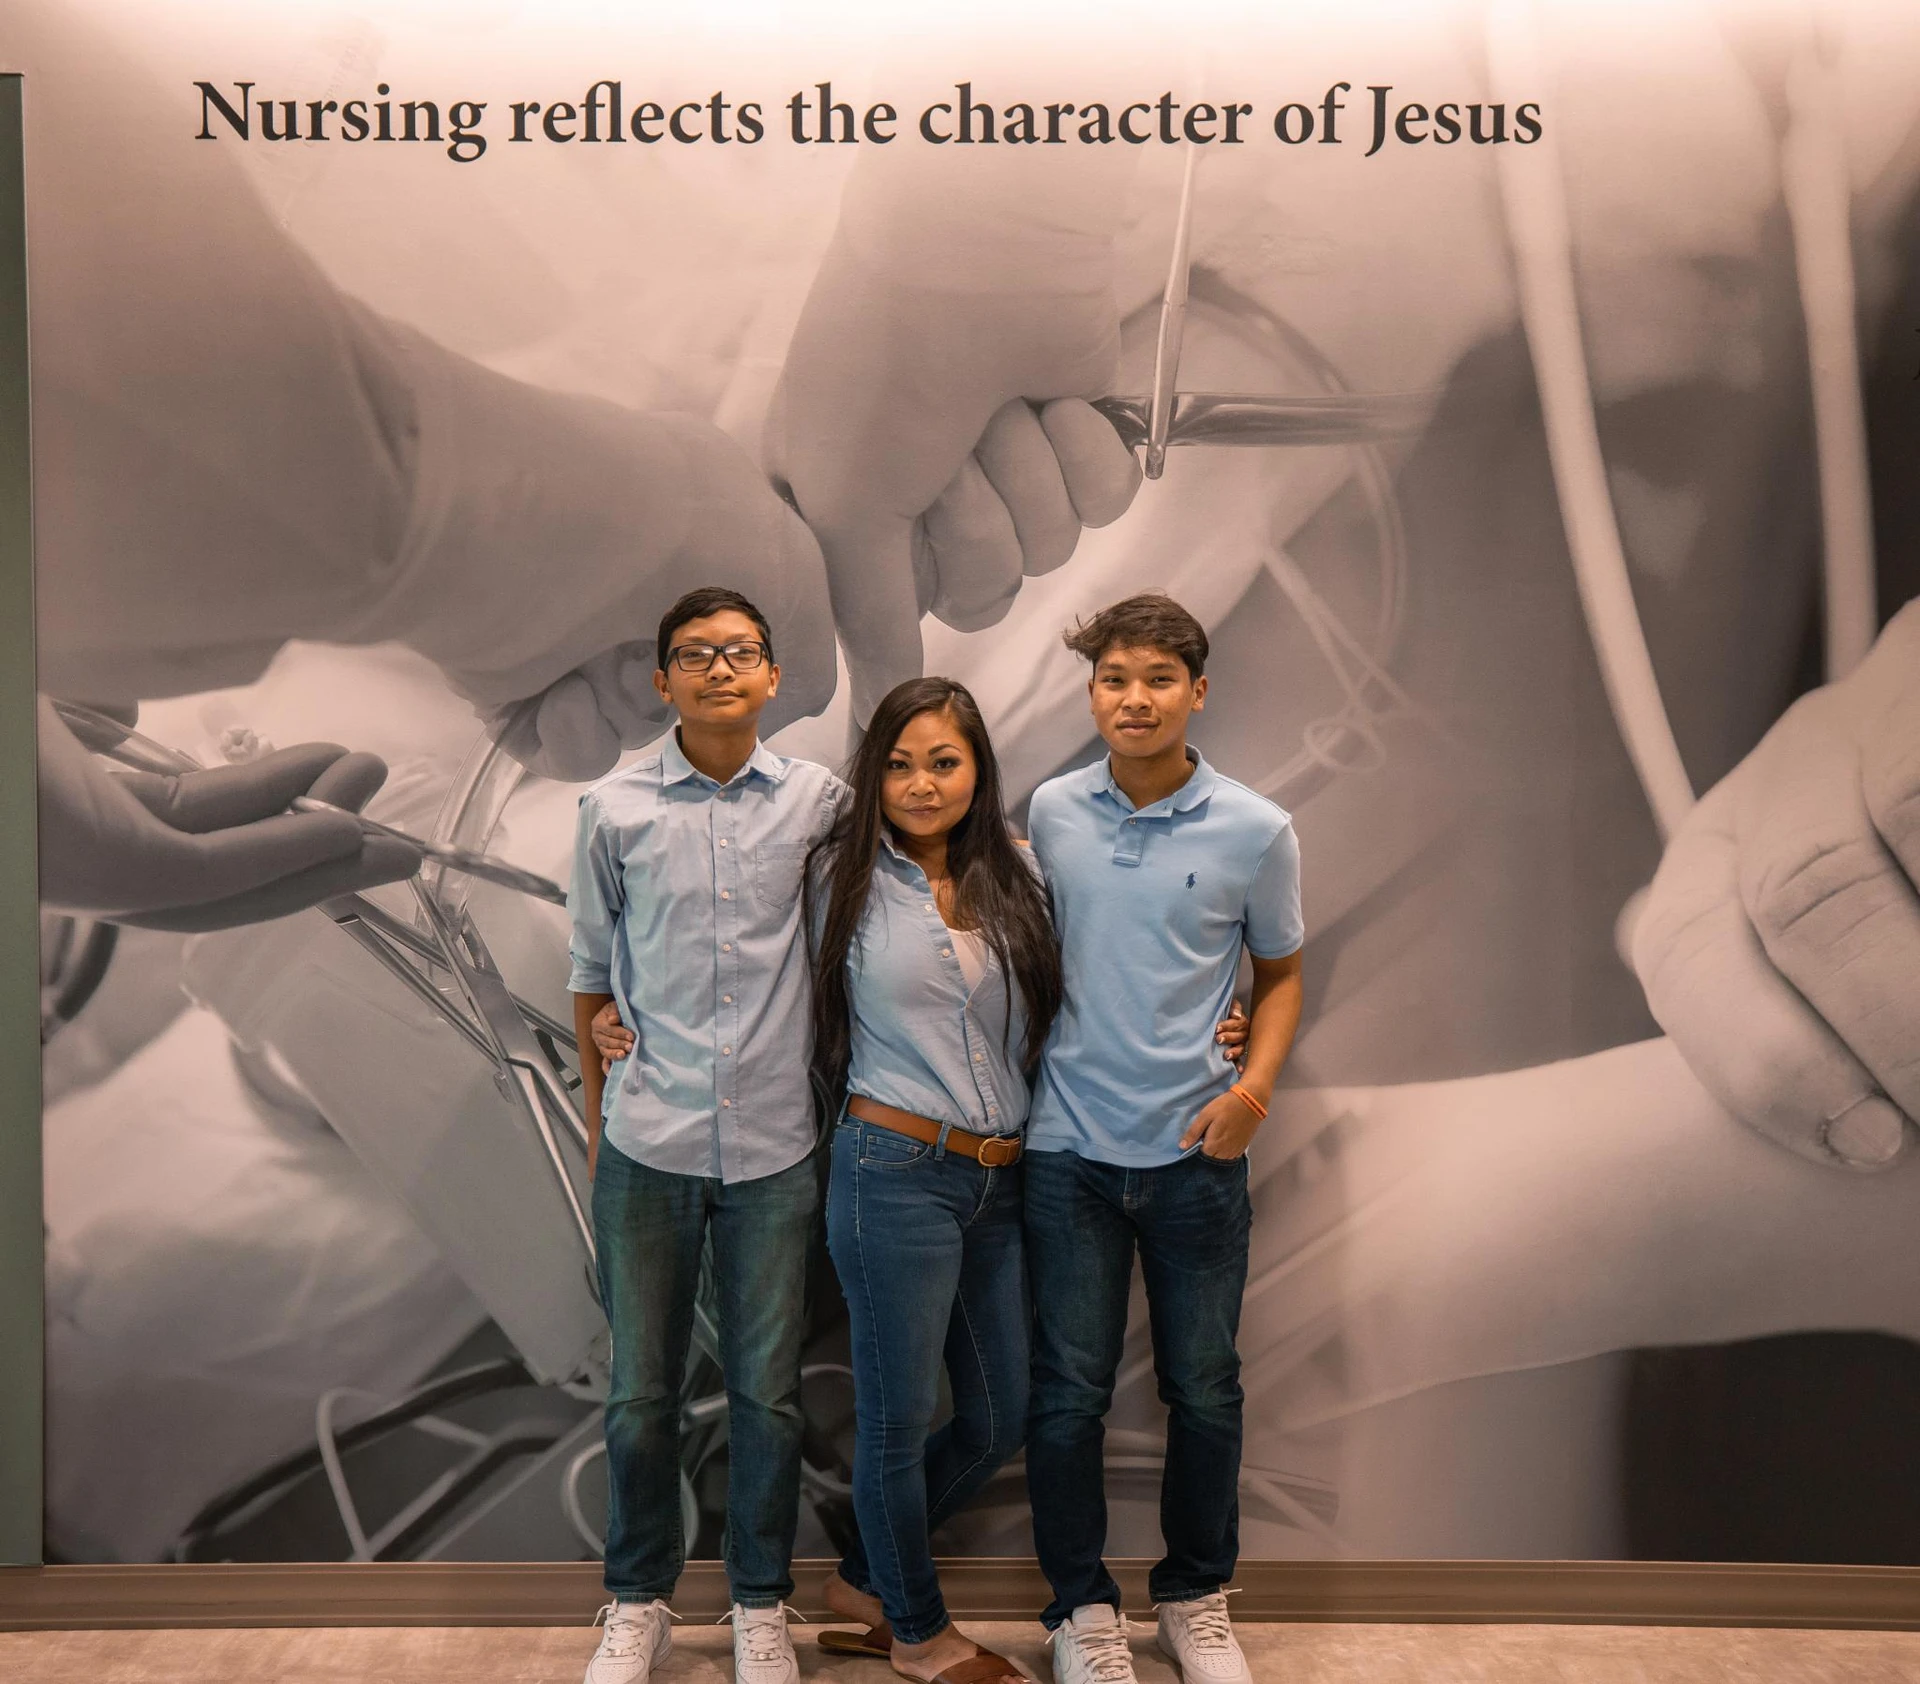 Karen Phongsavan and her two sons pose in front of a wall in the Southwestern Adventist University nursing building that says "Nursing reflects the character of Jesus"